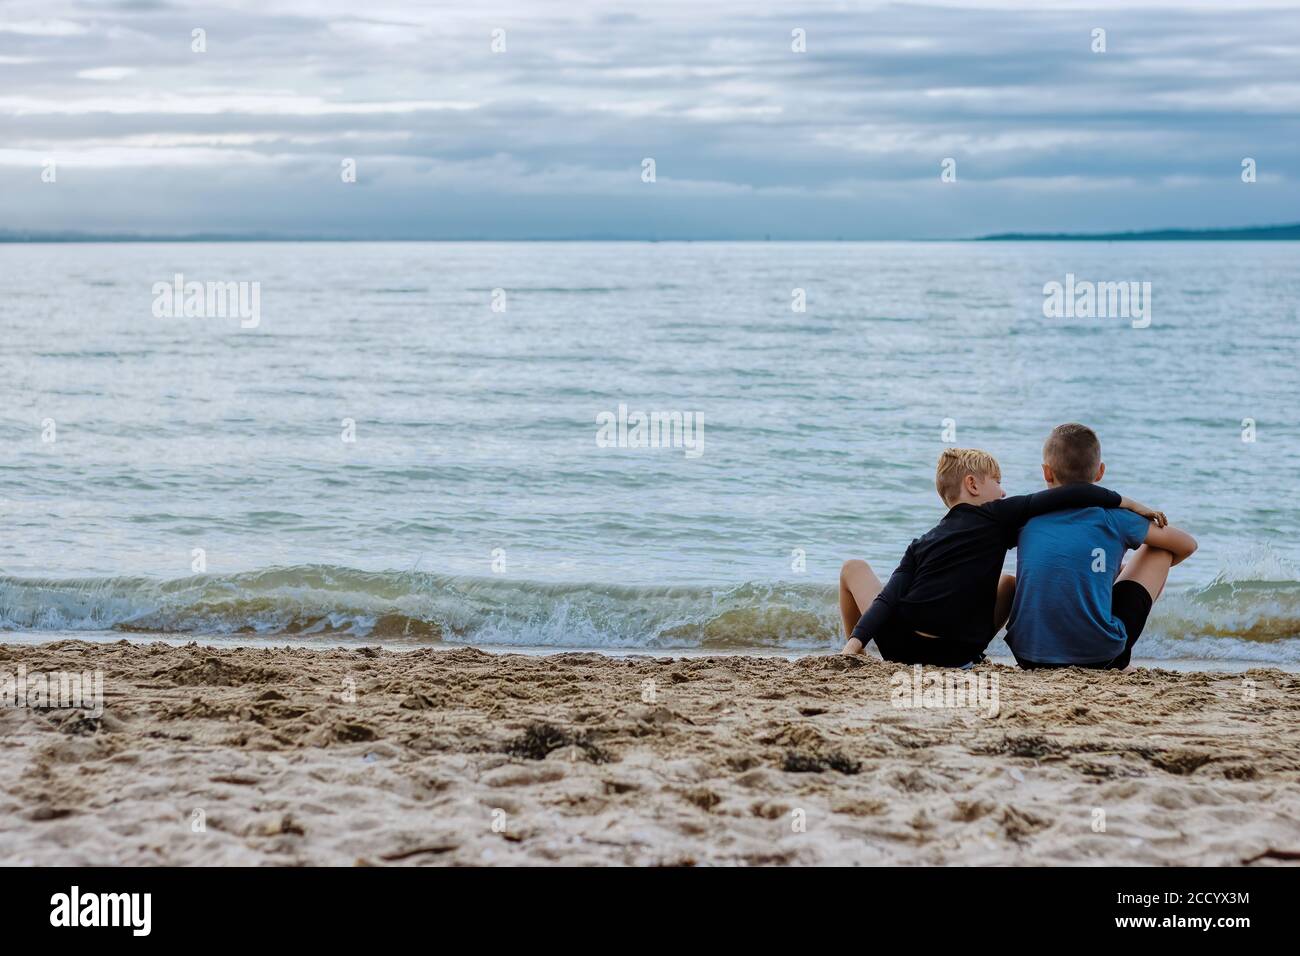 Two brothers bond over the beauty of the ocean as they sit on the beach, with the younger brother comforting the older one with an arm around him. Stock Photo